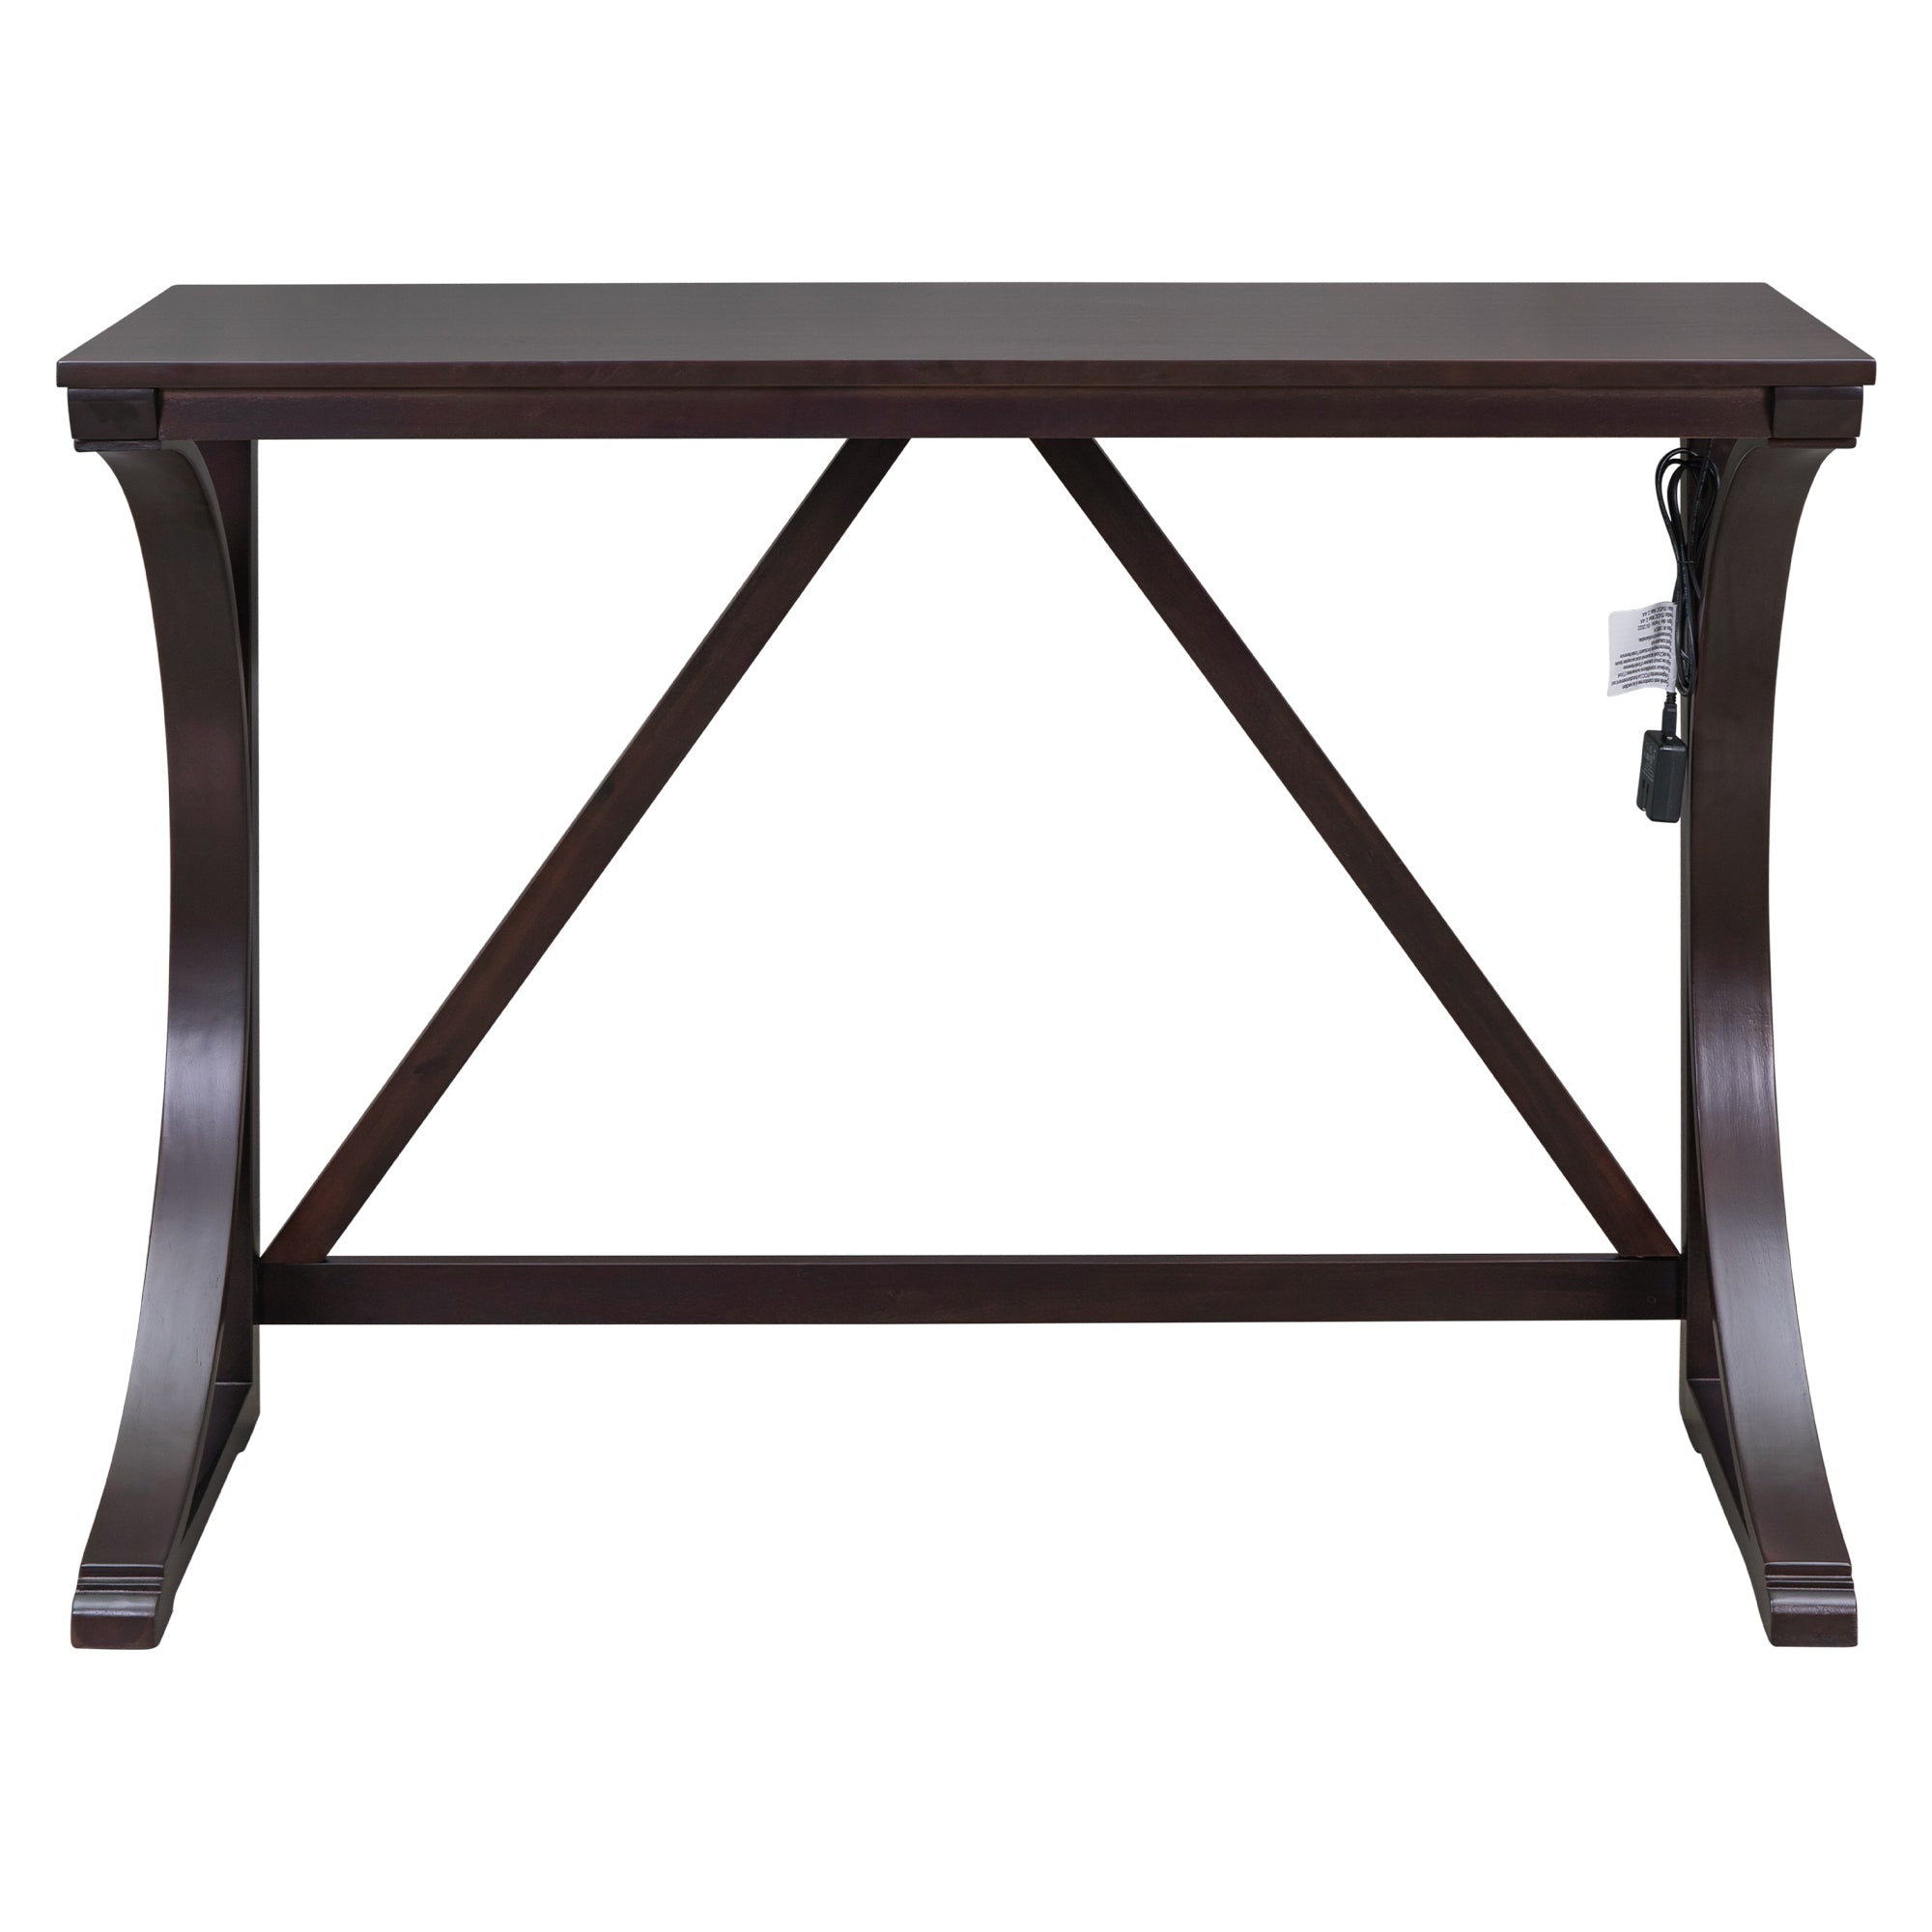 Farmhouse 3 Piece Counter Height Dining Table espresso-wood-dining room-solid